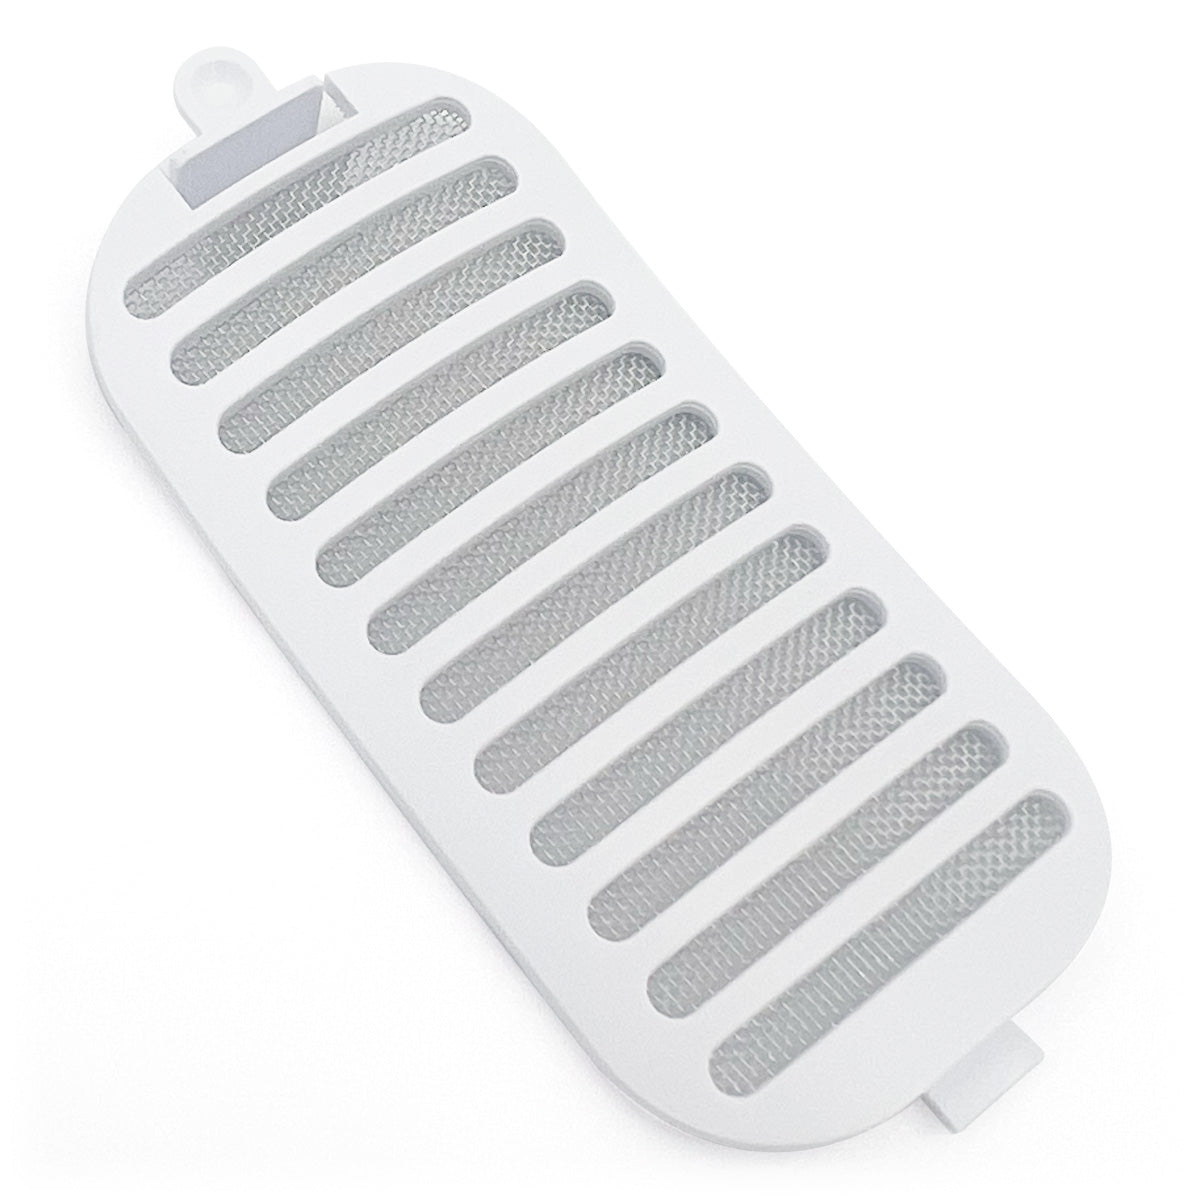 Filter Cover for Rhythm P2 Series Portable Oxygen Concentrators